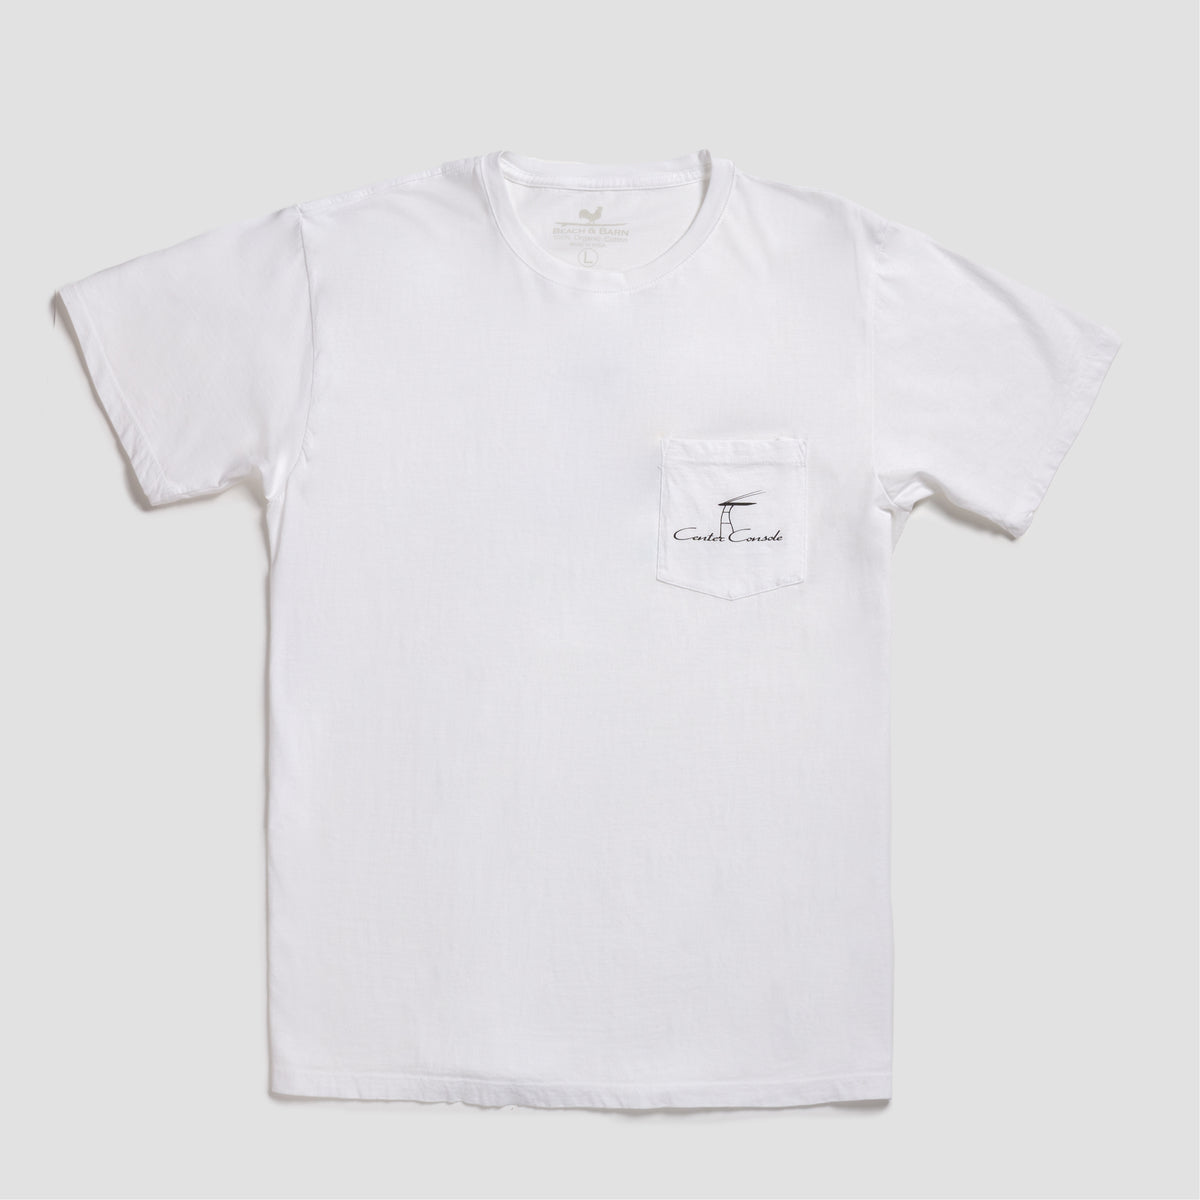 Sale - Center Console Boat House Tee Shirt